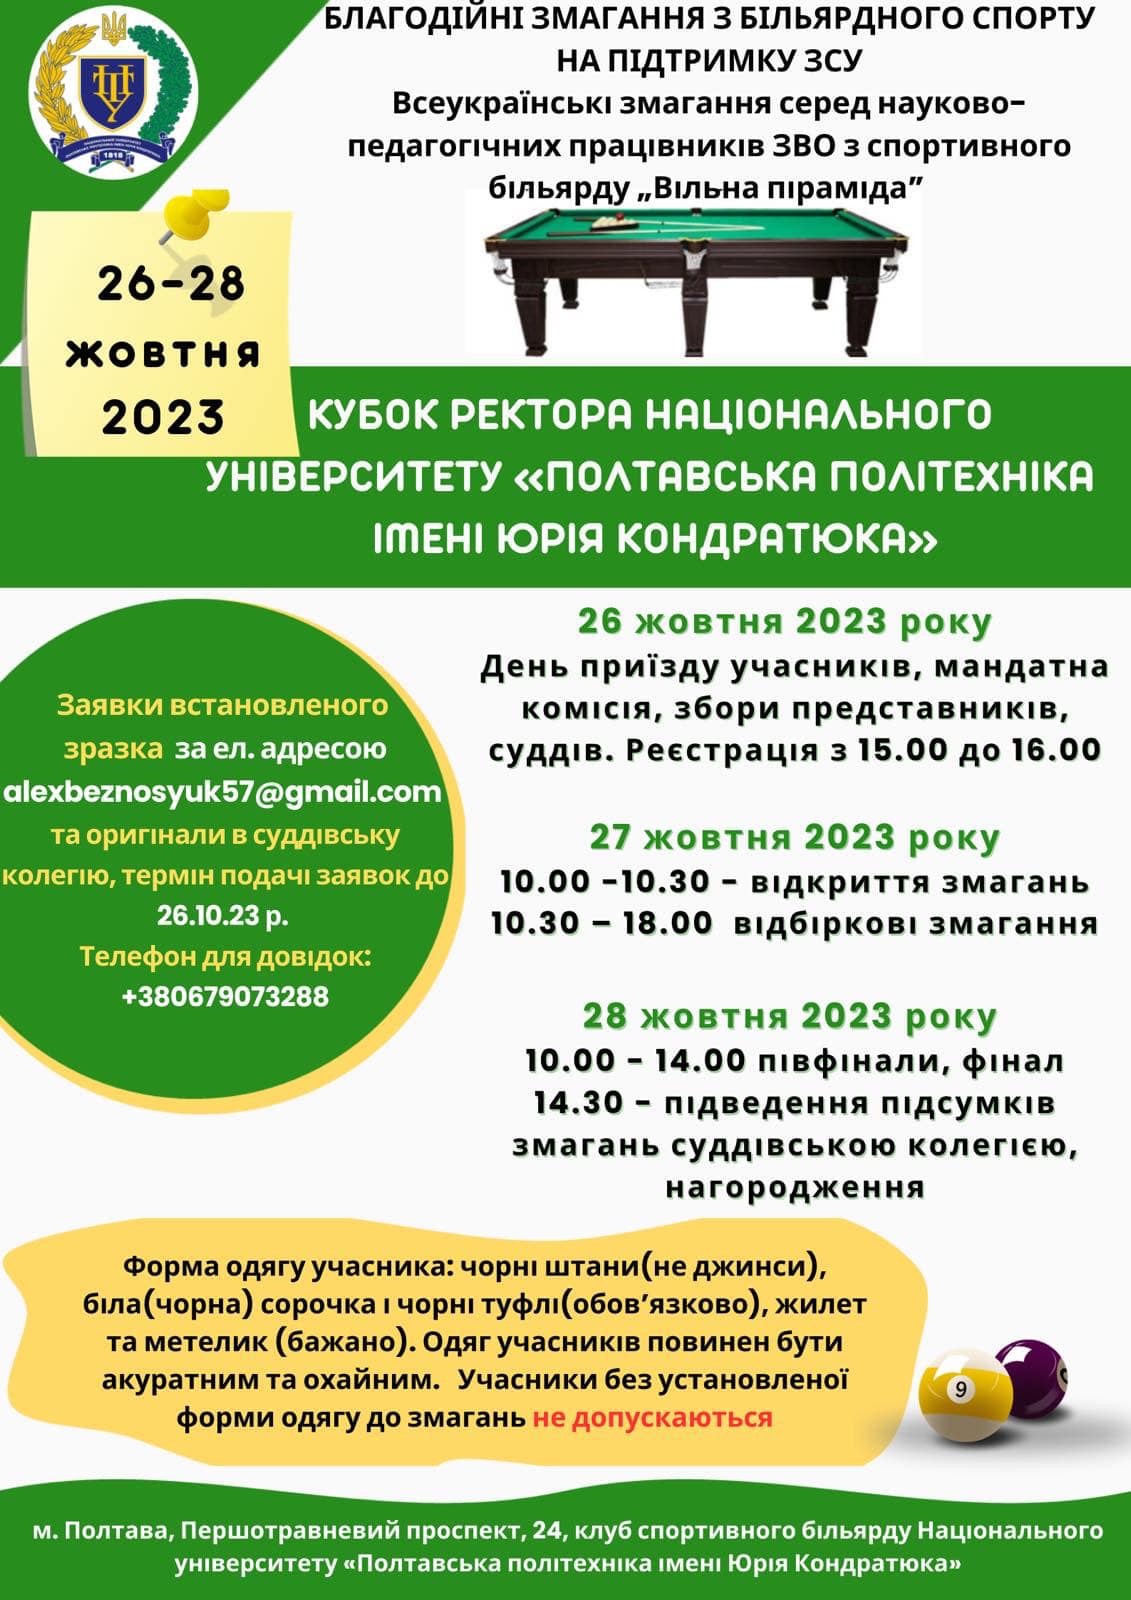 All-Ukrainian sports billiard competition “Free Pyramid” for the Rector’s Cup of Poltava Polytechnic is to be held at the university